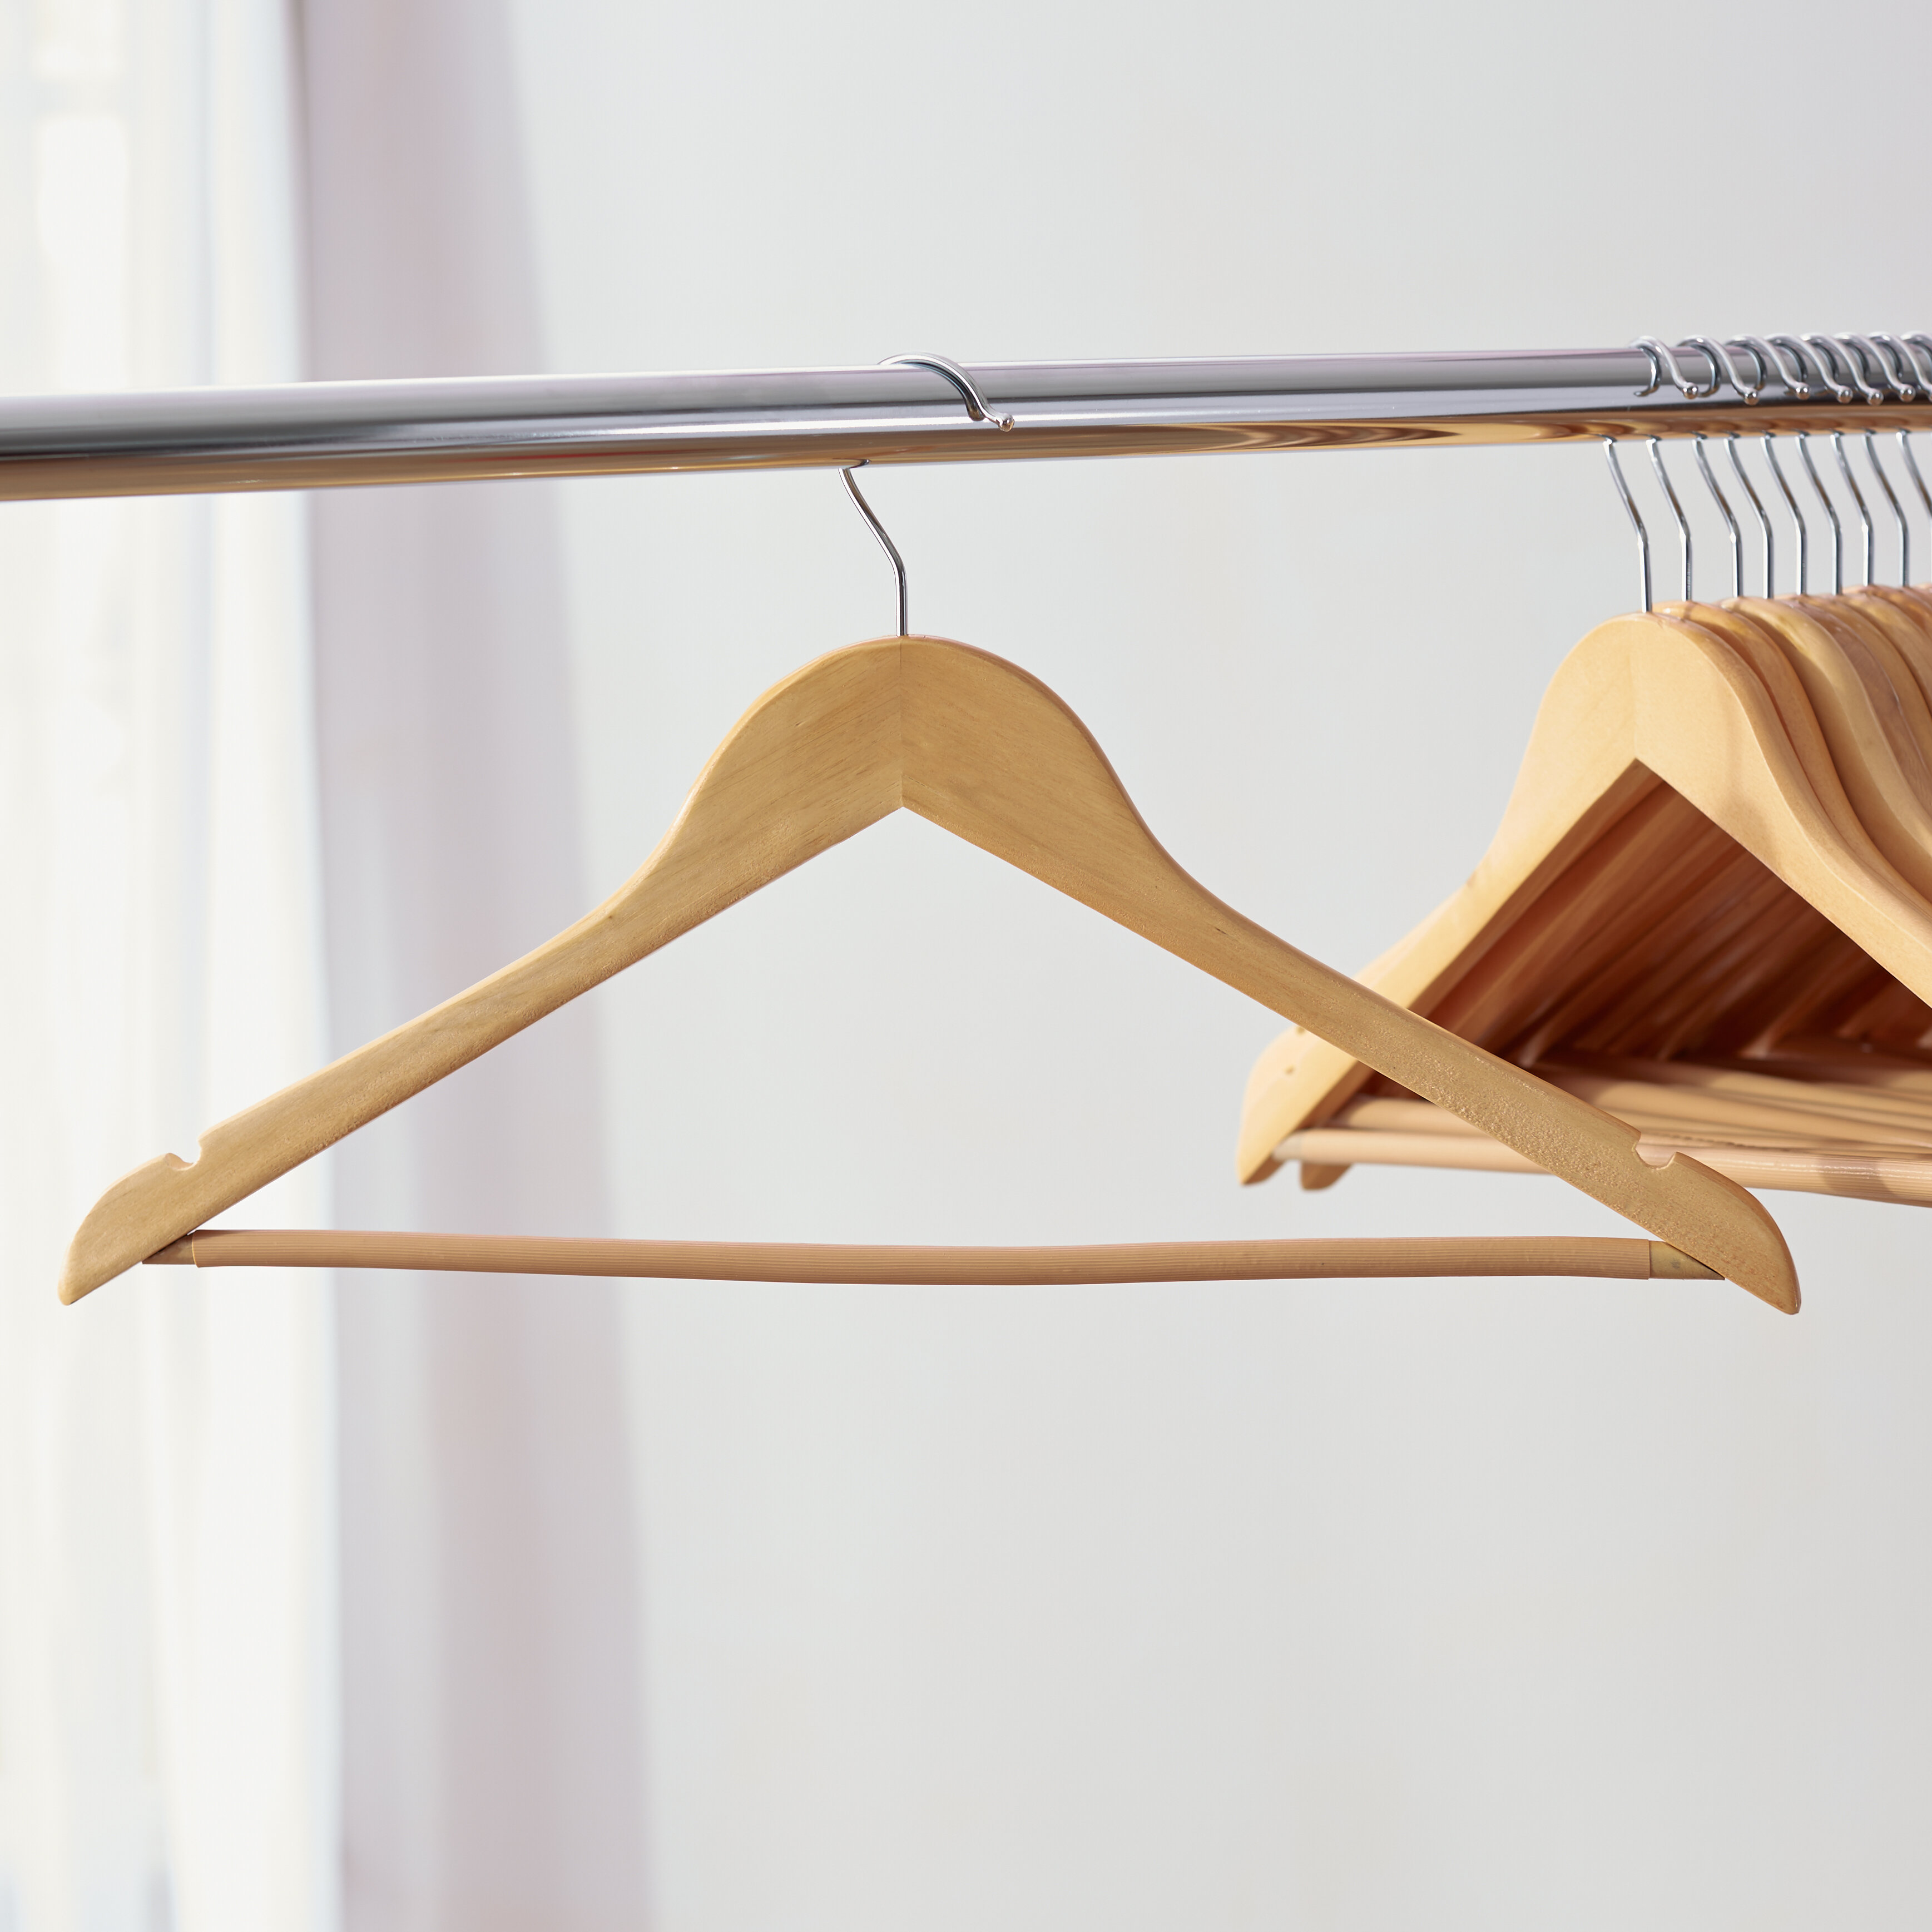 1-100 Coat Hanger Made of Maple Wood with Skirt Notches and Non-Slip Trouser Bar Natural 